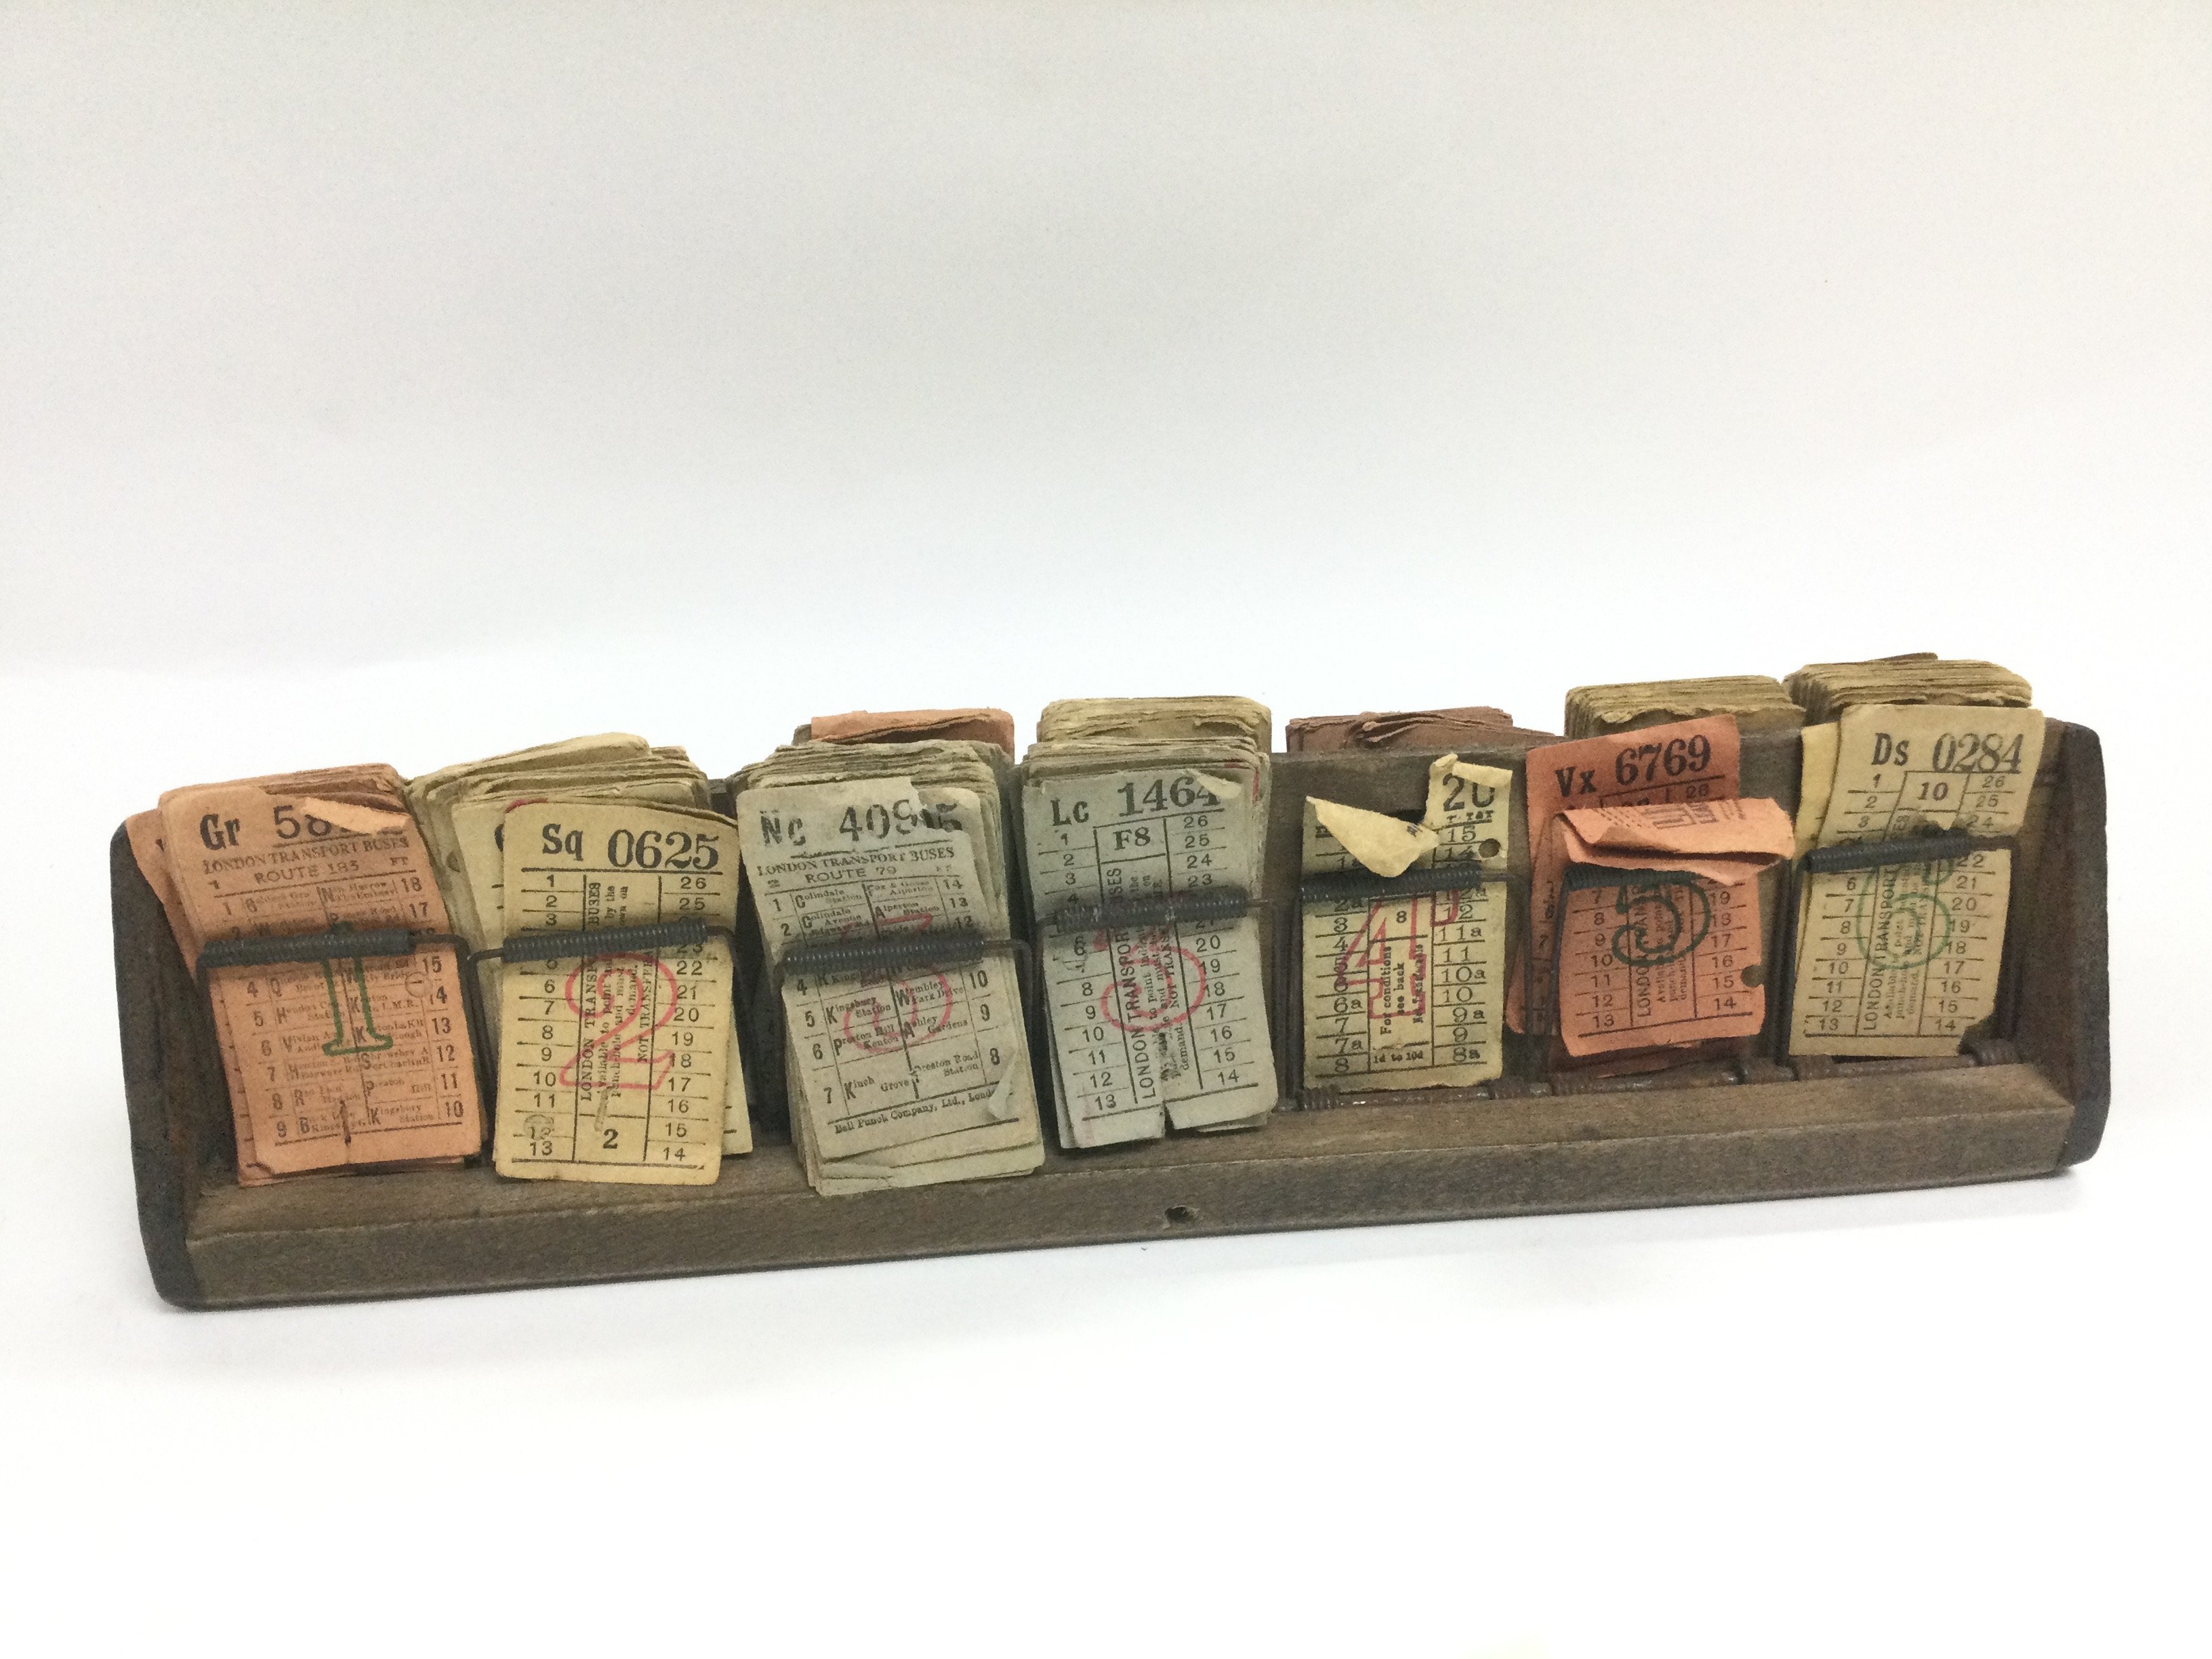 A collection of old bus tickets. - Image 2 of 2